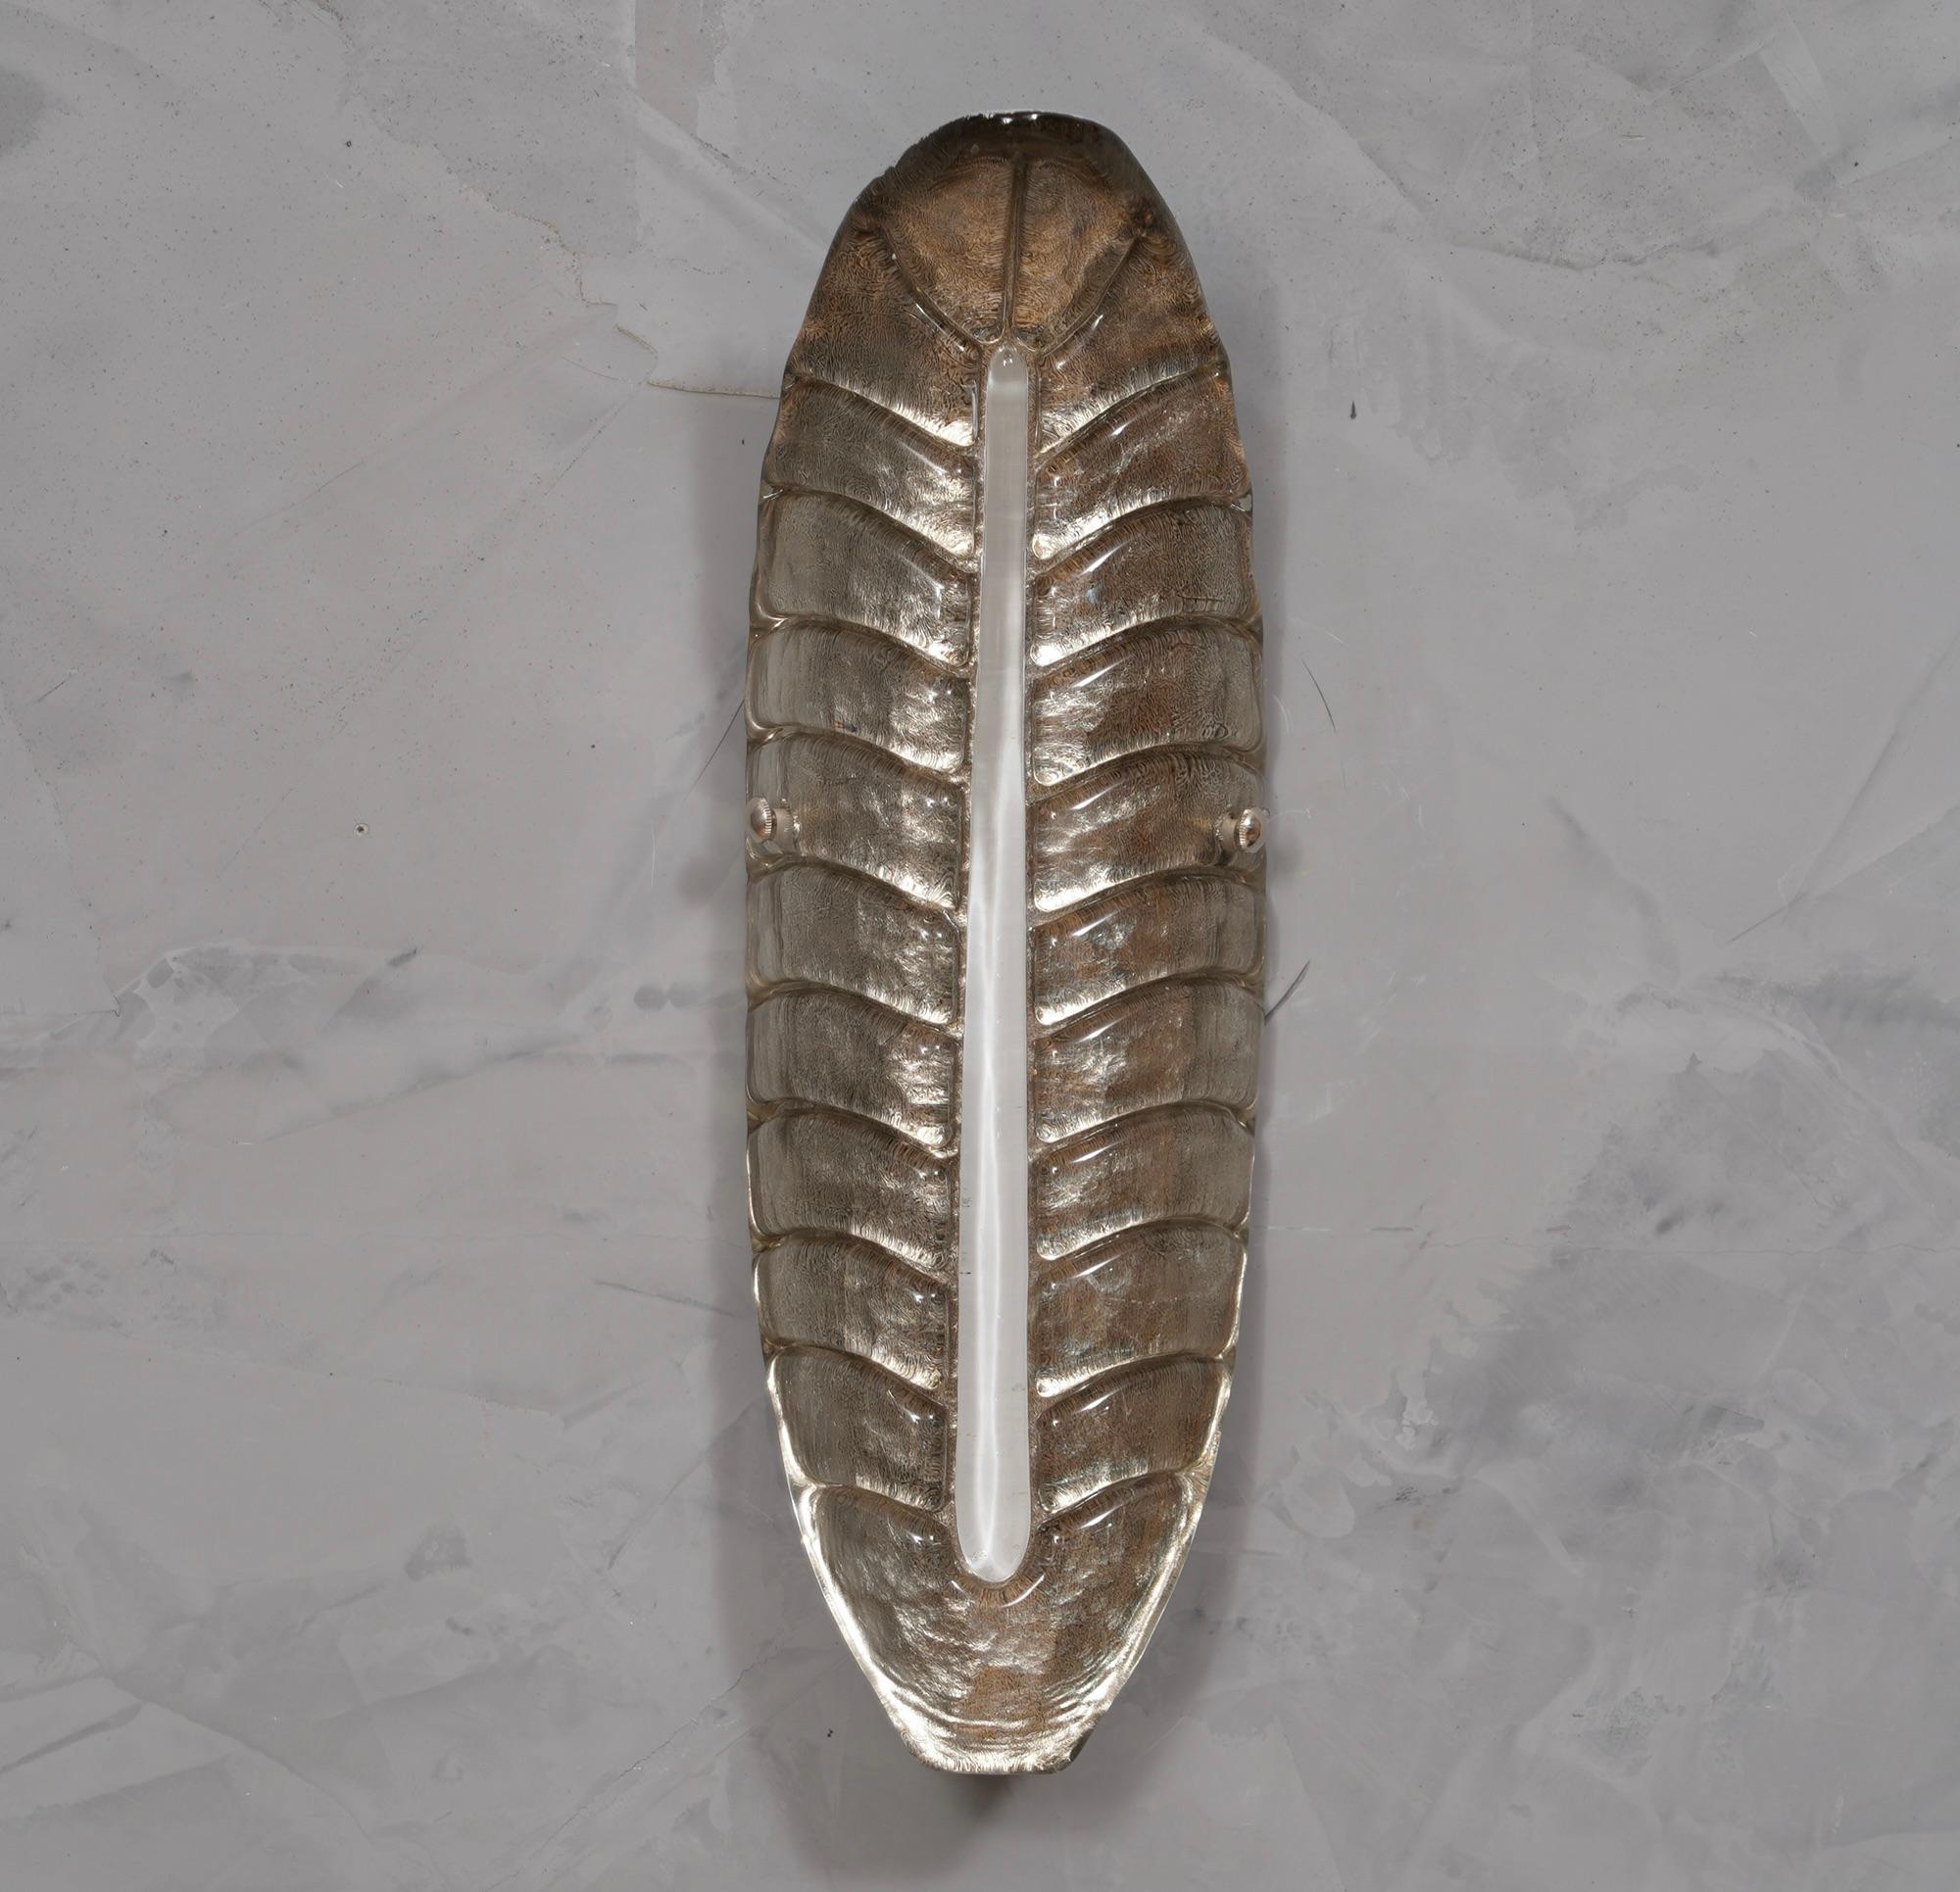 Beautiful design for this leaf-shaped applique, all silver with a vertical white rib.

The applique is made up of a single piece of Murano glass, almost as if it were a Murano 